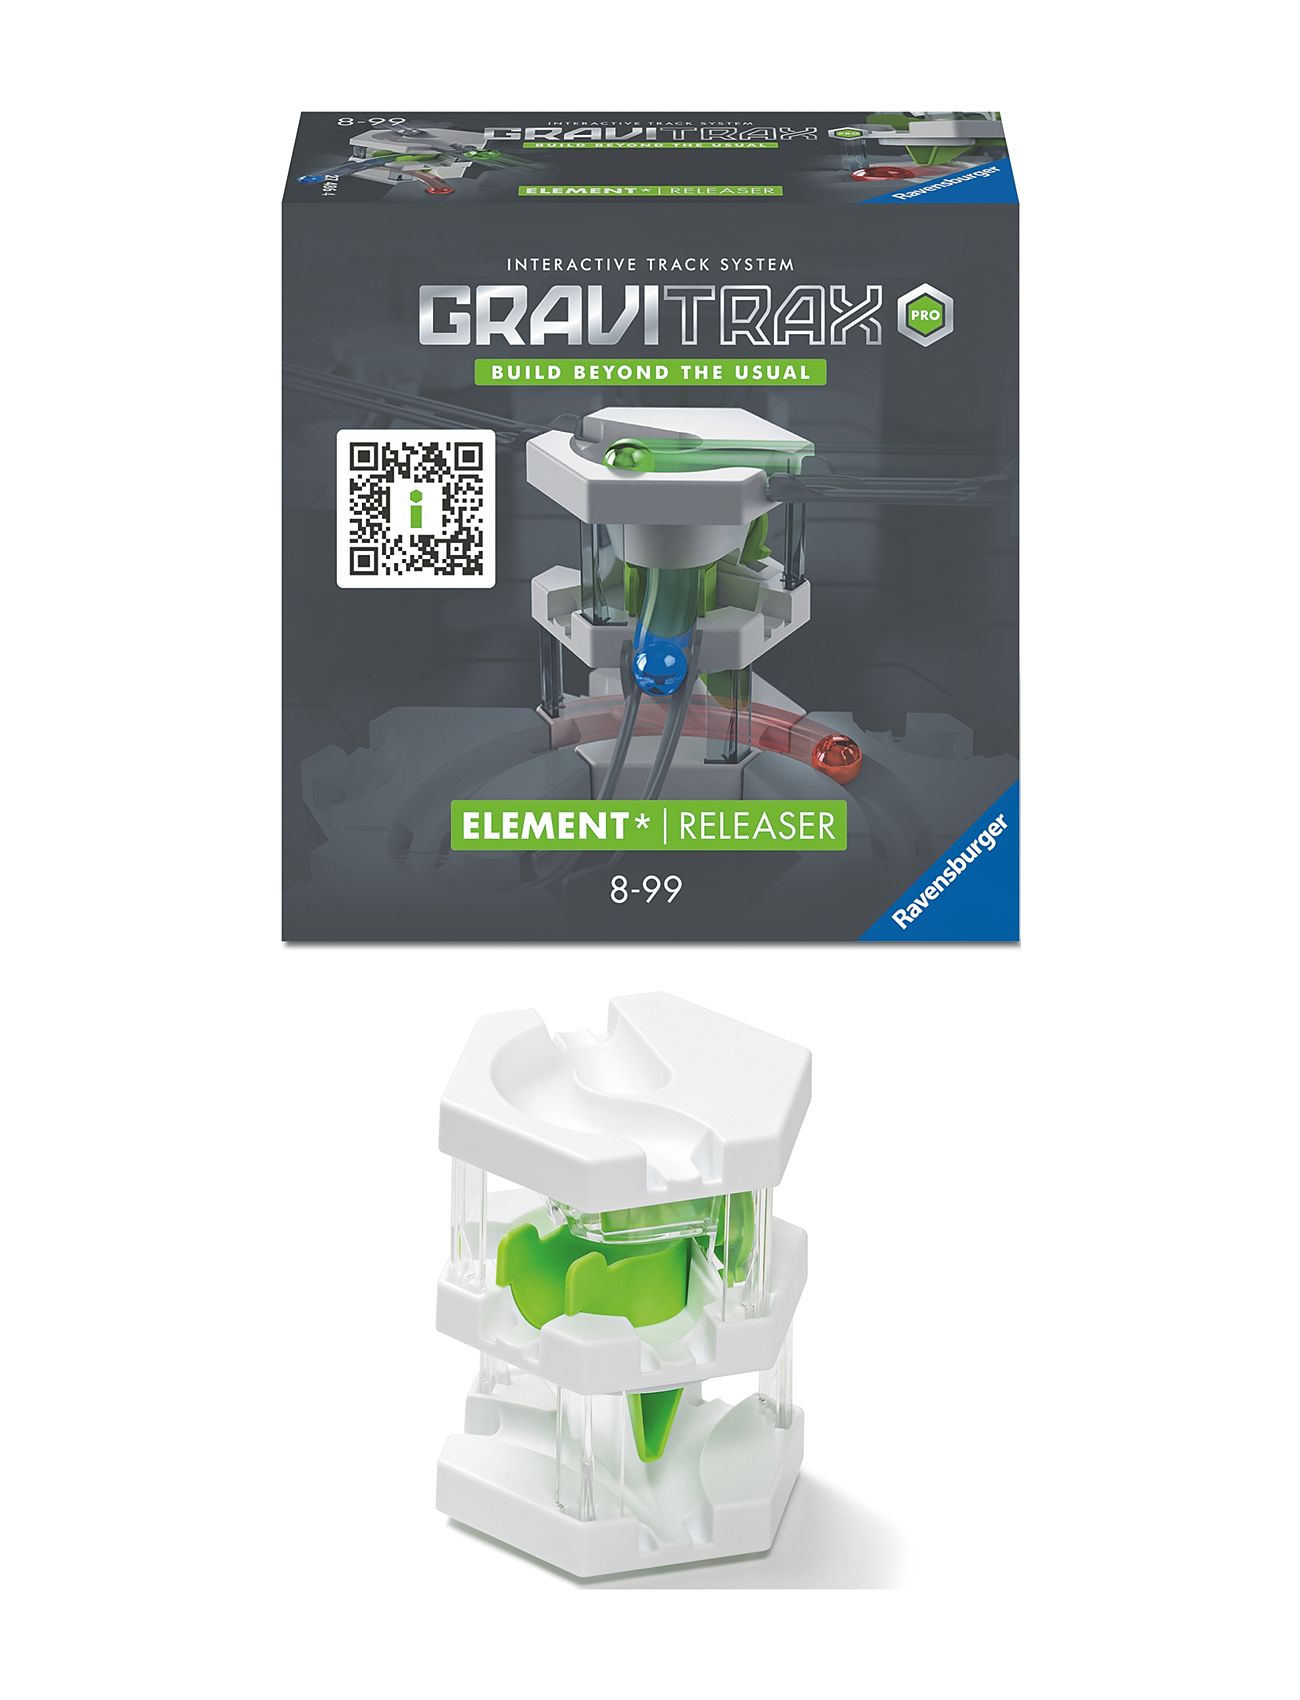 Gravitrax Pro Element Releaser Toys Experiments And Science Multi/patterned Ravensburger